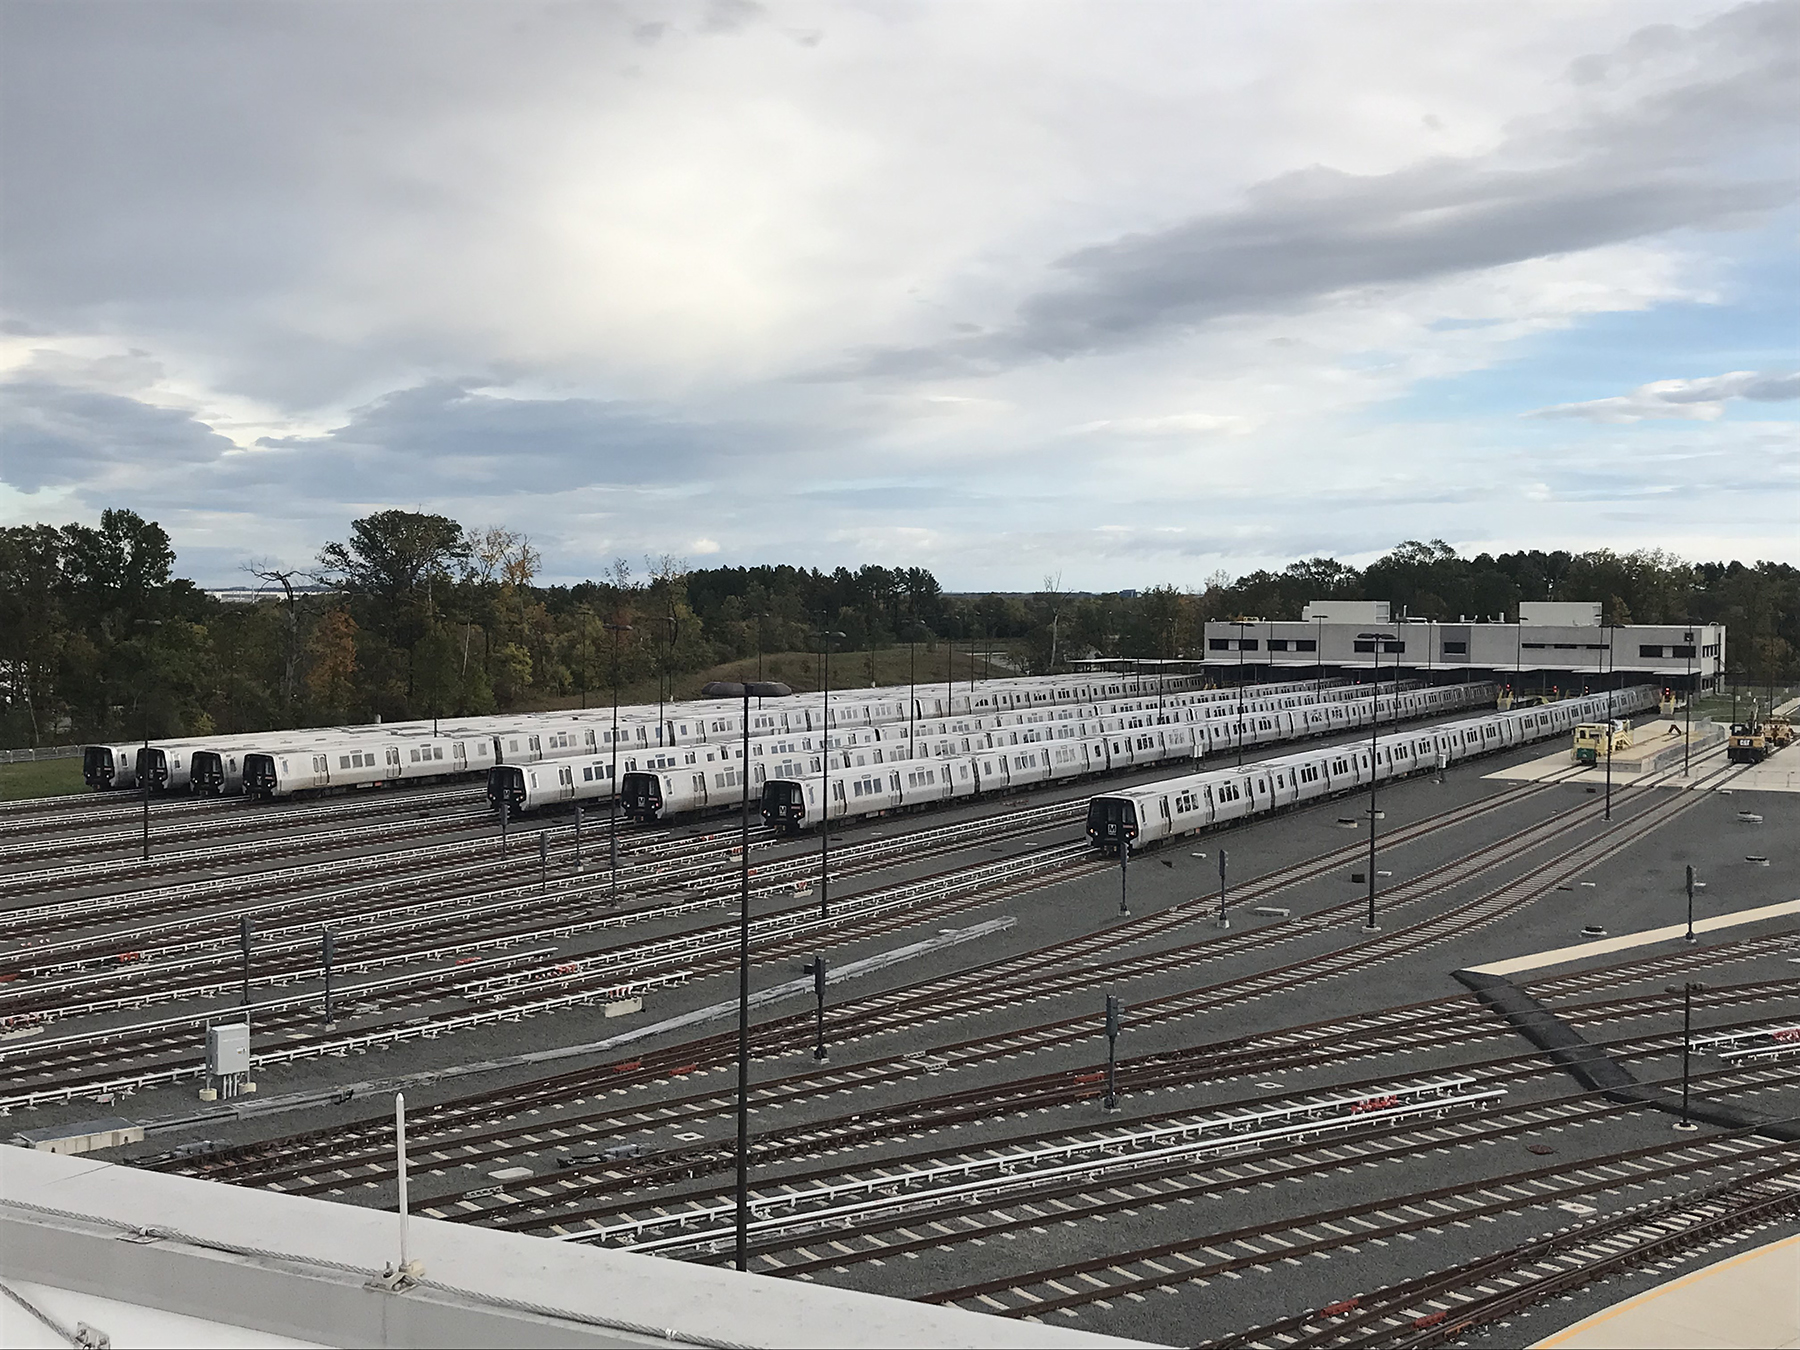 This 90-acre rail yard was constructed on the property of the Washington Dulles International Airport. (Image courtesy of Dulles Corridor Metrorail Project)